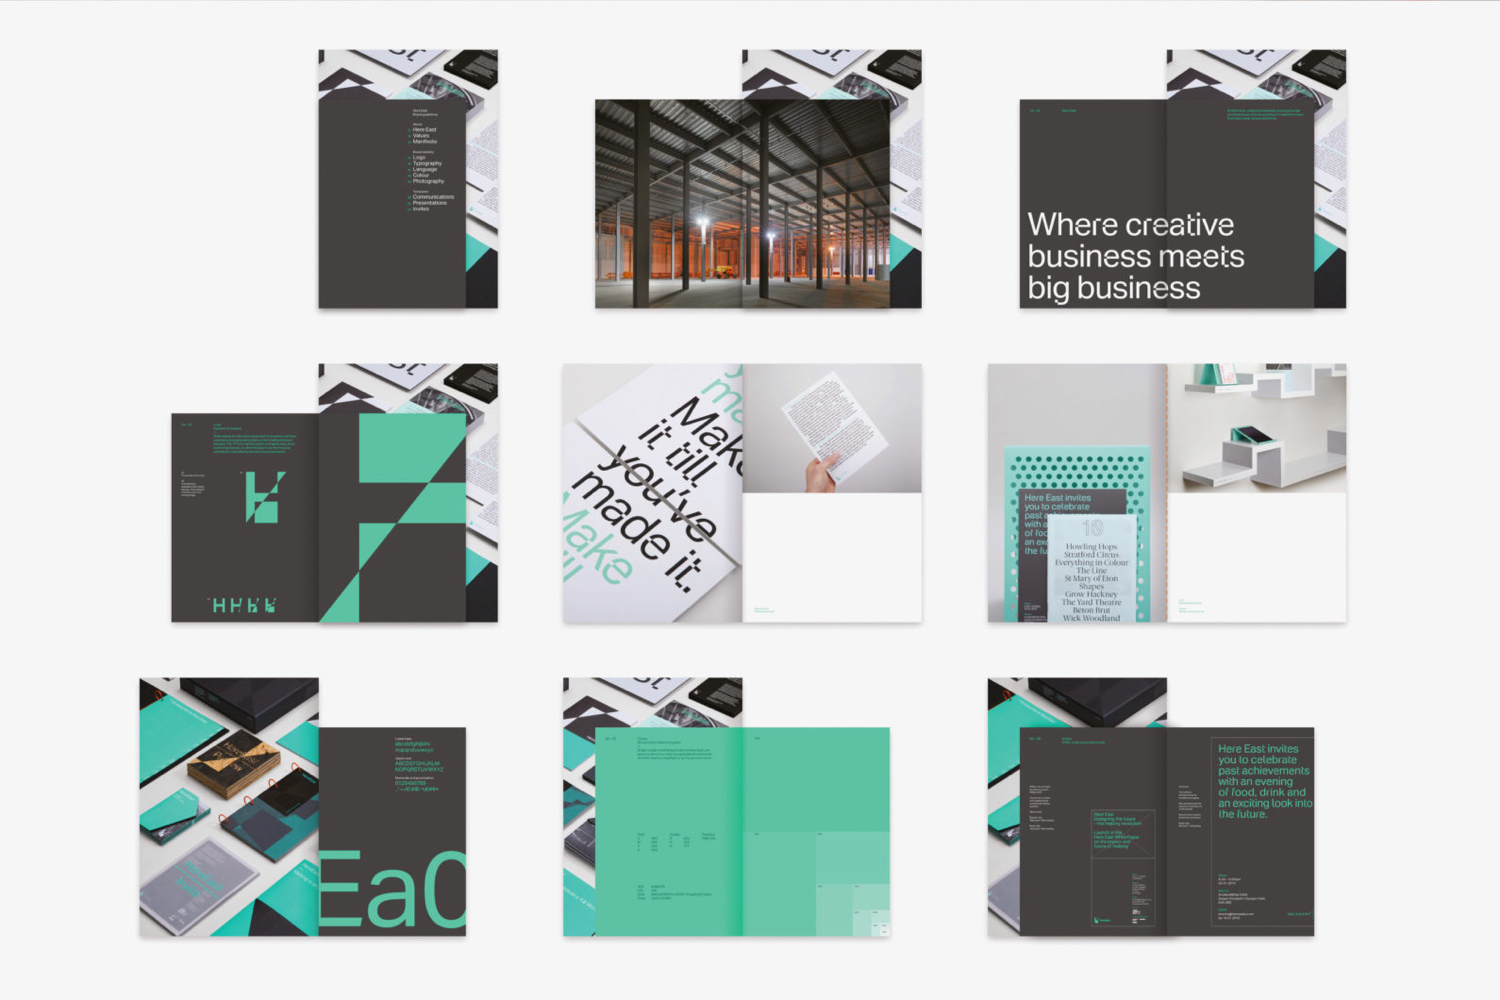 Graphic identity and brand book by dn&co. for commercial space Here East